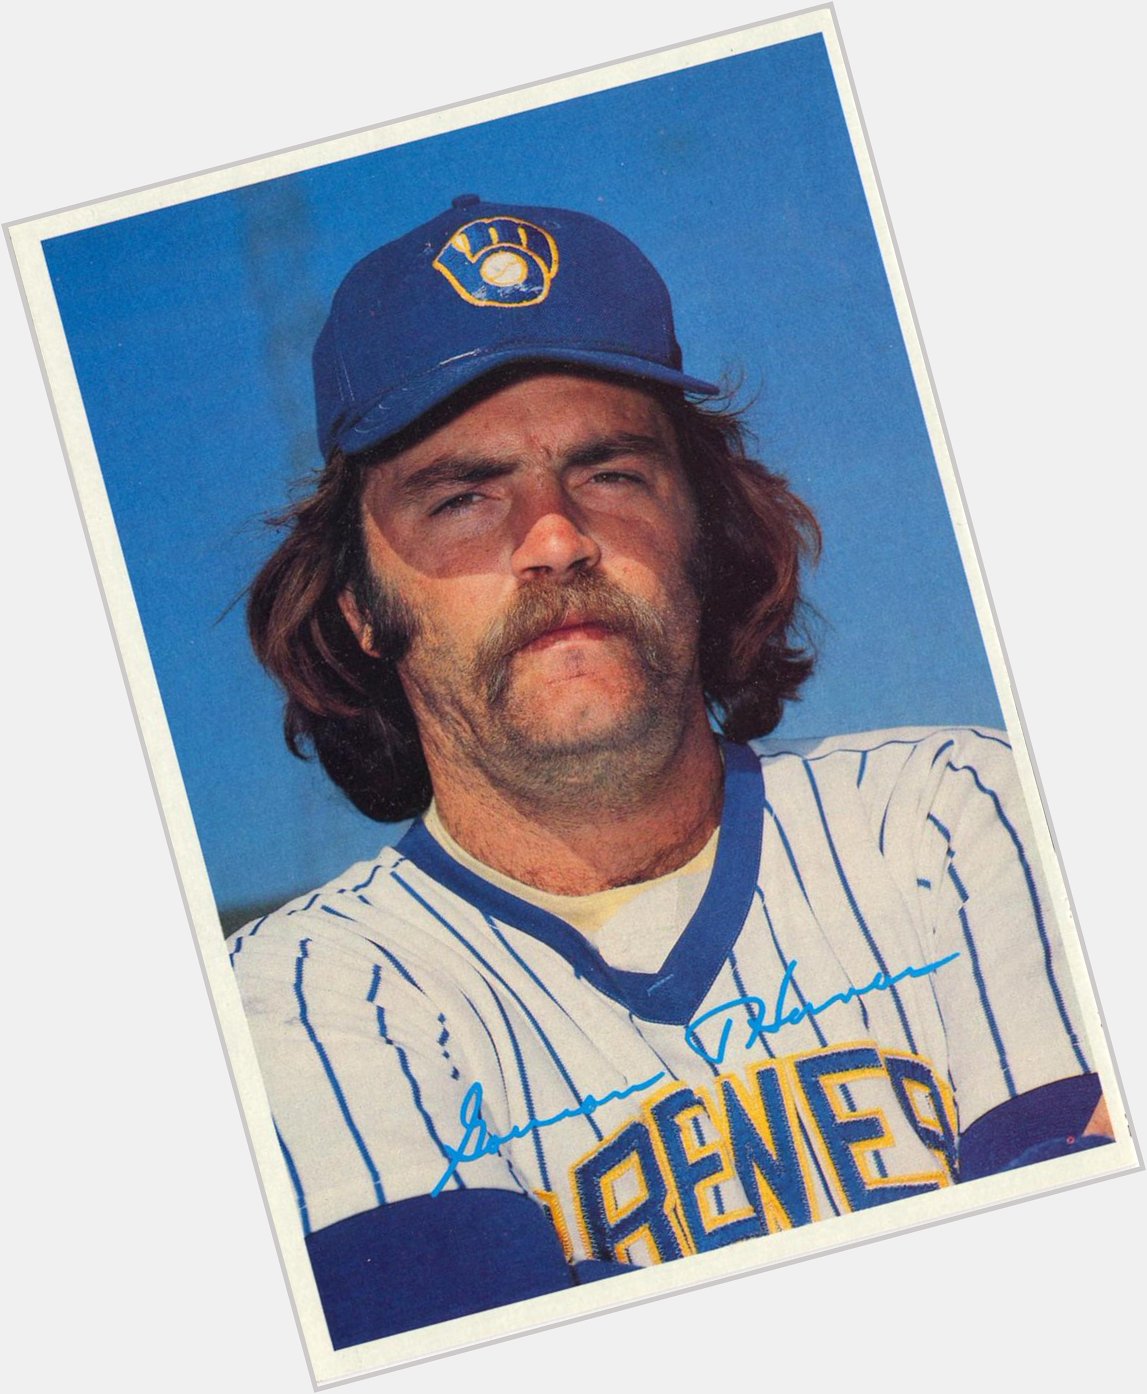 Happy 64th birthday to Gorman Thomas, 6th in WAR among players who whiffed in 24% of PA.  